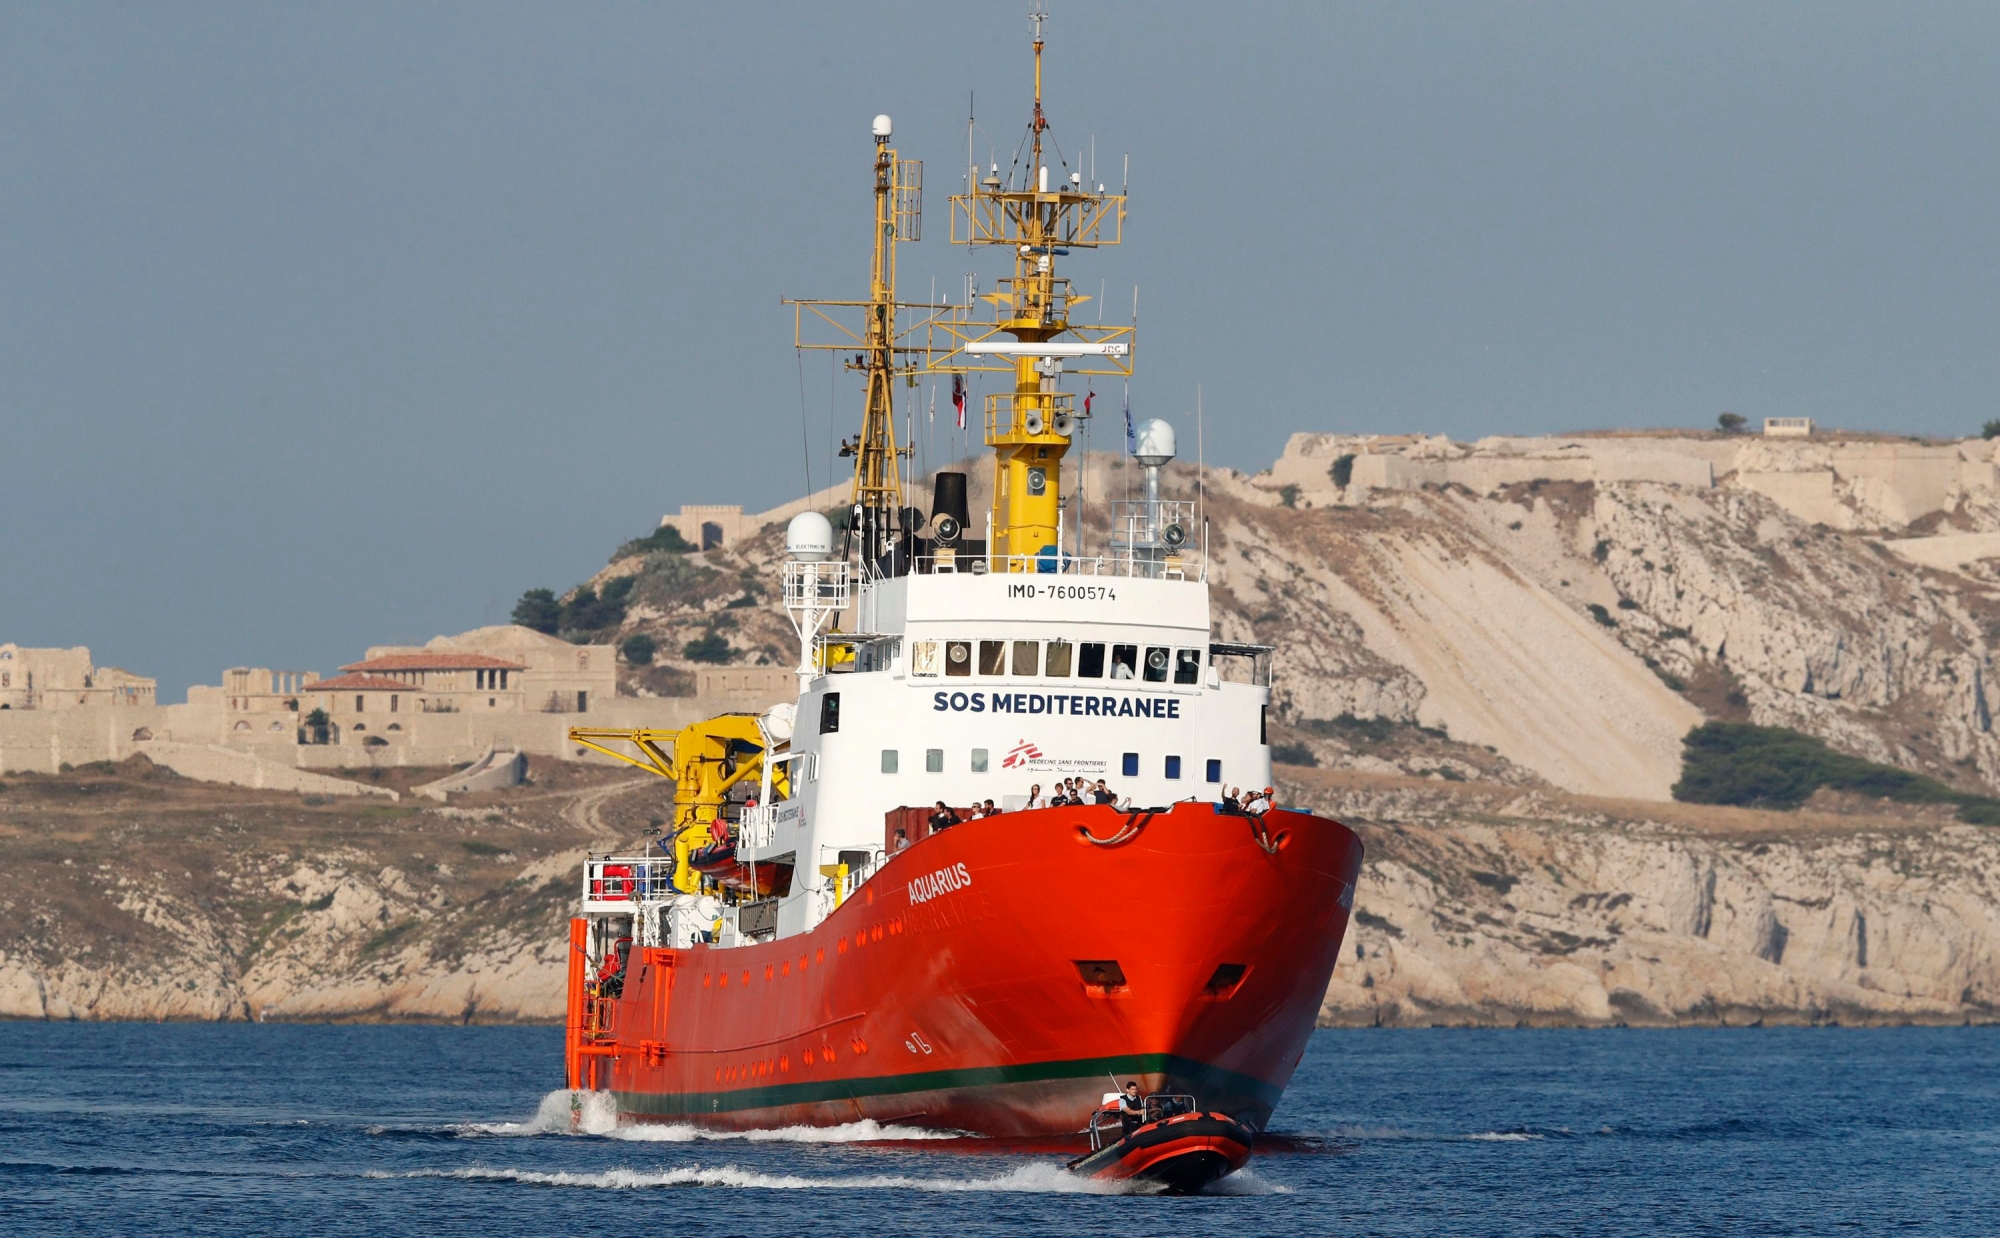 epa06849218 Crew members of the search and rescue vessel 'Aquarius' of NGO 'SOS Mediterranee' wave from the ship's bow as the vessel arrives in the port of Marseille, France, 29 June 2018. The 'Aquarius' arrives in the port for a five-days stop and check up after rescue operations in the Mediterranean Sea.  EPA/GUILLAUME HORCAJUELO FRANCE MIGRATION RESCUE